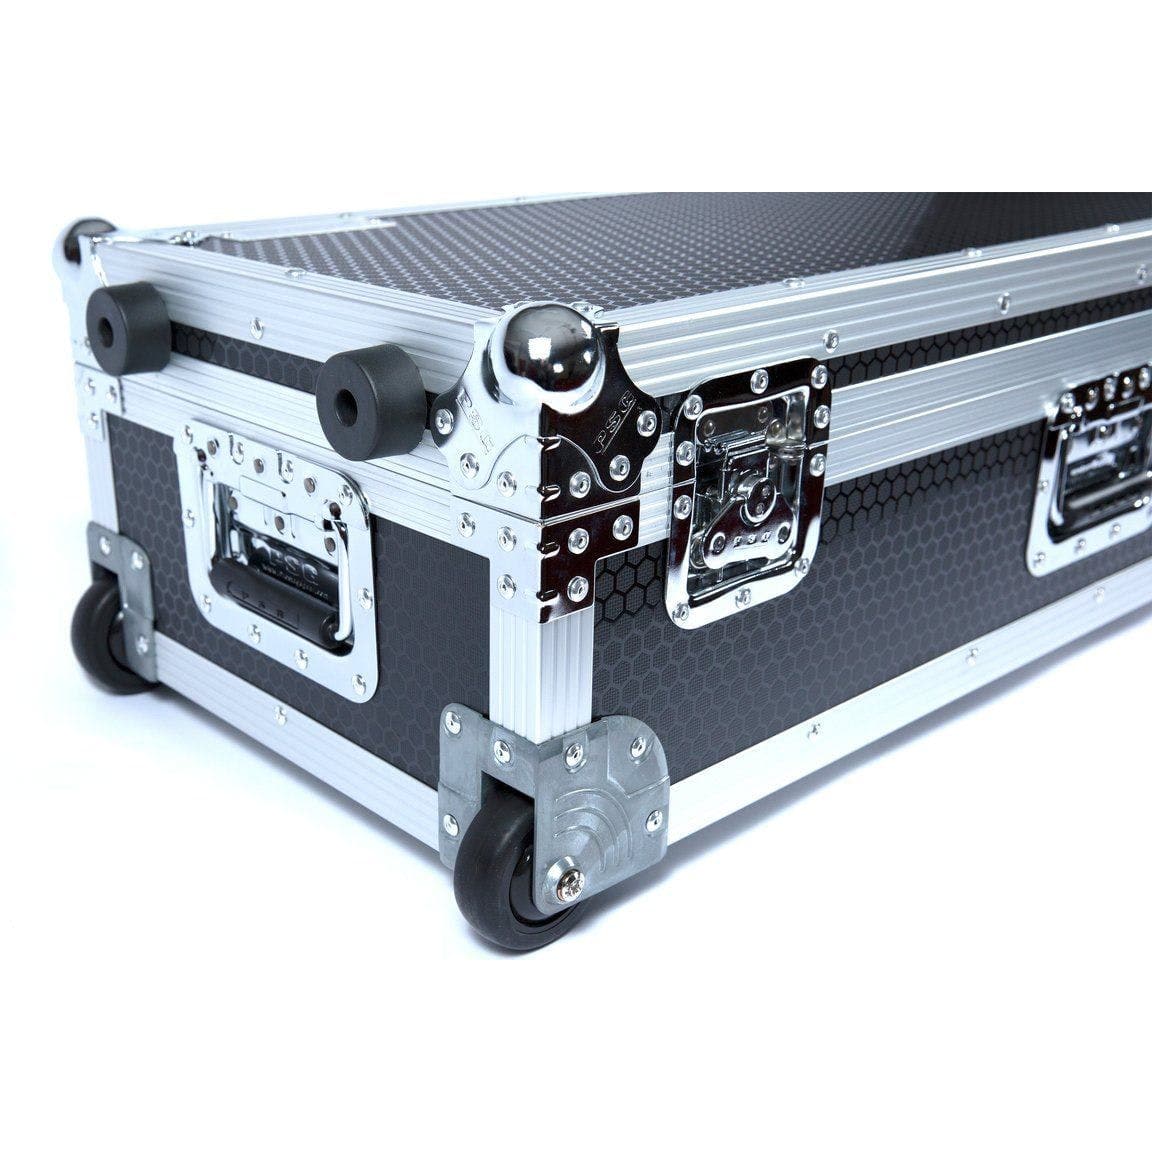 Pedaltrain JR Max Pedalboard with Wheeled Tour Case - Black Honeycomb Finish